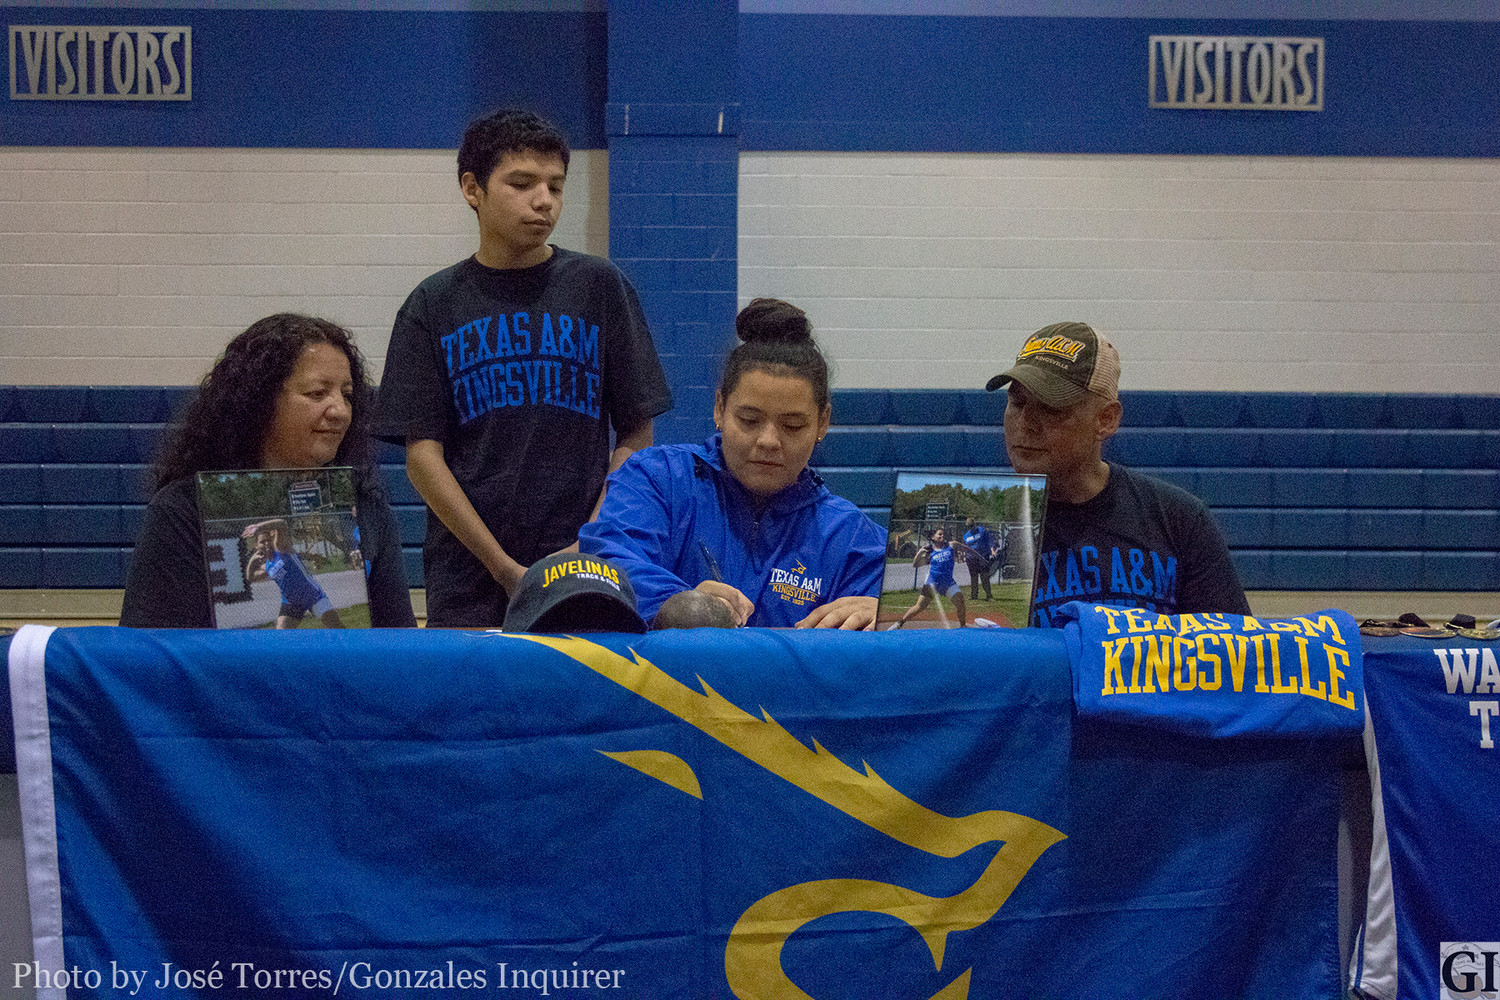 Malorie Puente signed with Texas A&M University-Kingsville on Monday. Pictured is Puente along with her family, including her mother Norma Puente who Malorie says has “been there all my life, ever since I was in junior high she was always at every game that I was at,” no matter where the game was played. “It’s something that I’m thankful for.”